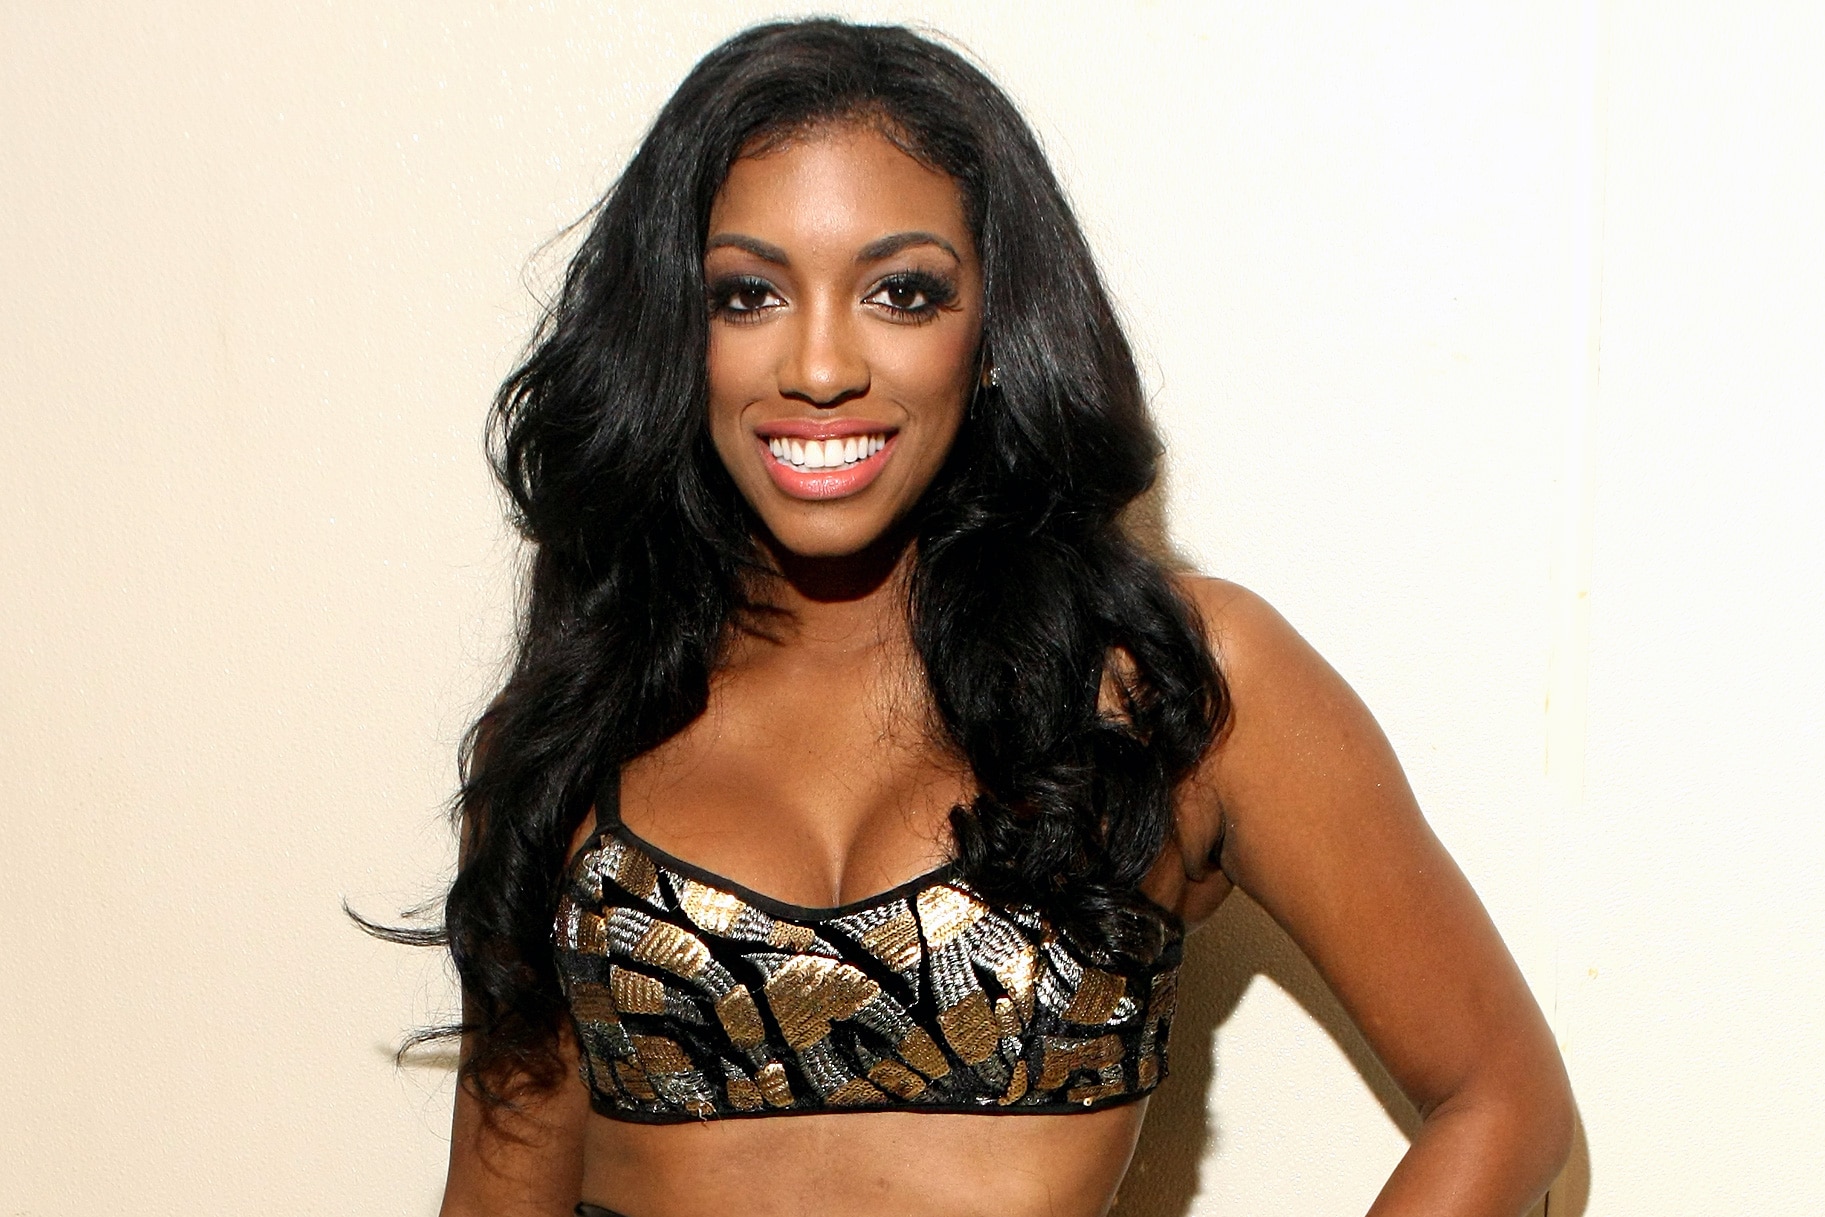 What Did Porsha Williams Name Her New Boobs? 